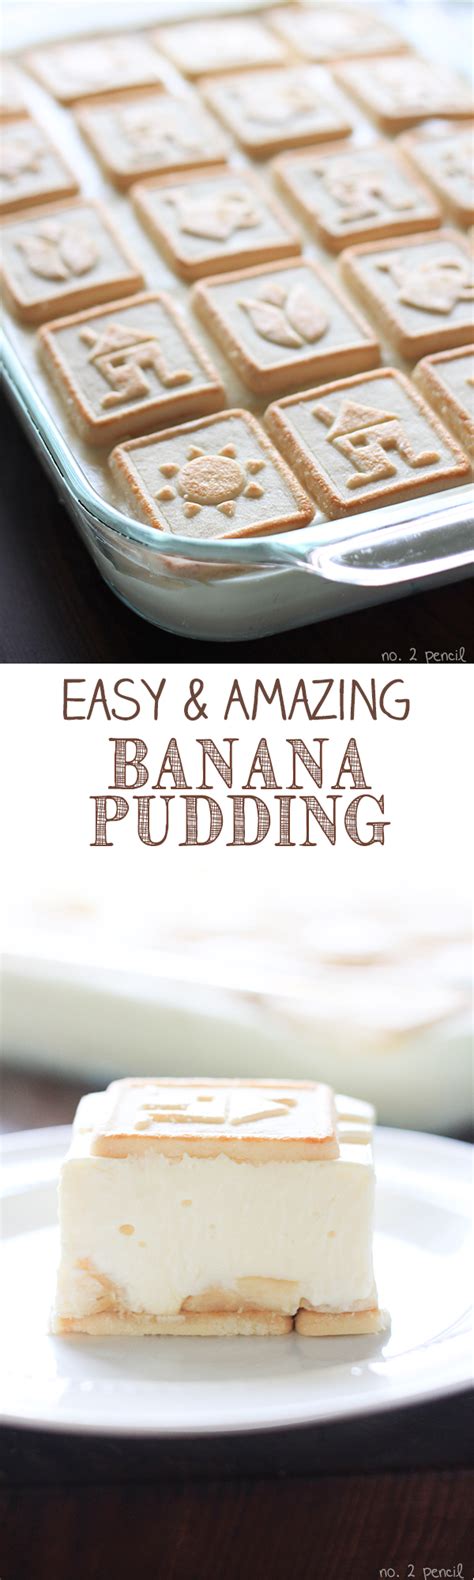 So easy and you can't love bananas and want a delicious dessert to share with friends and family? Paula Deen Banana Pudding Recipe